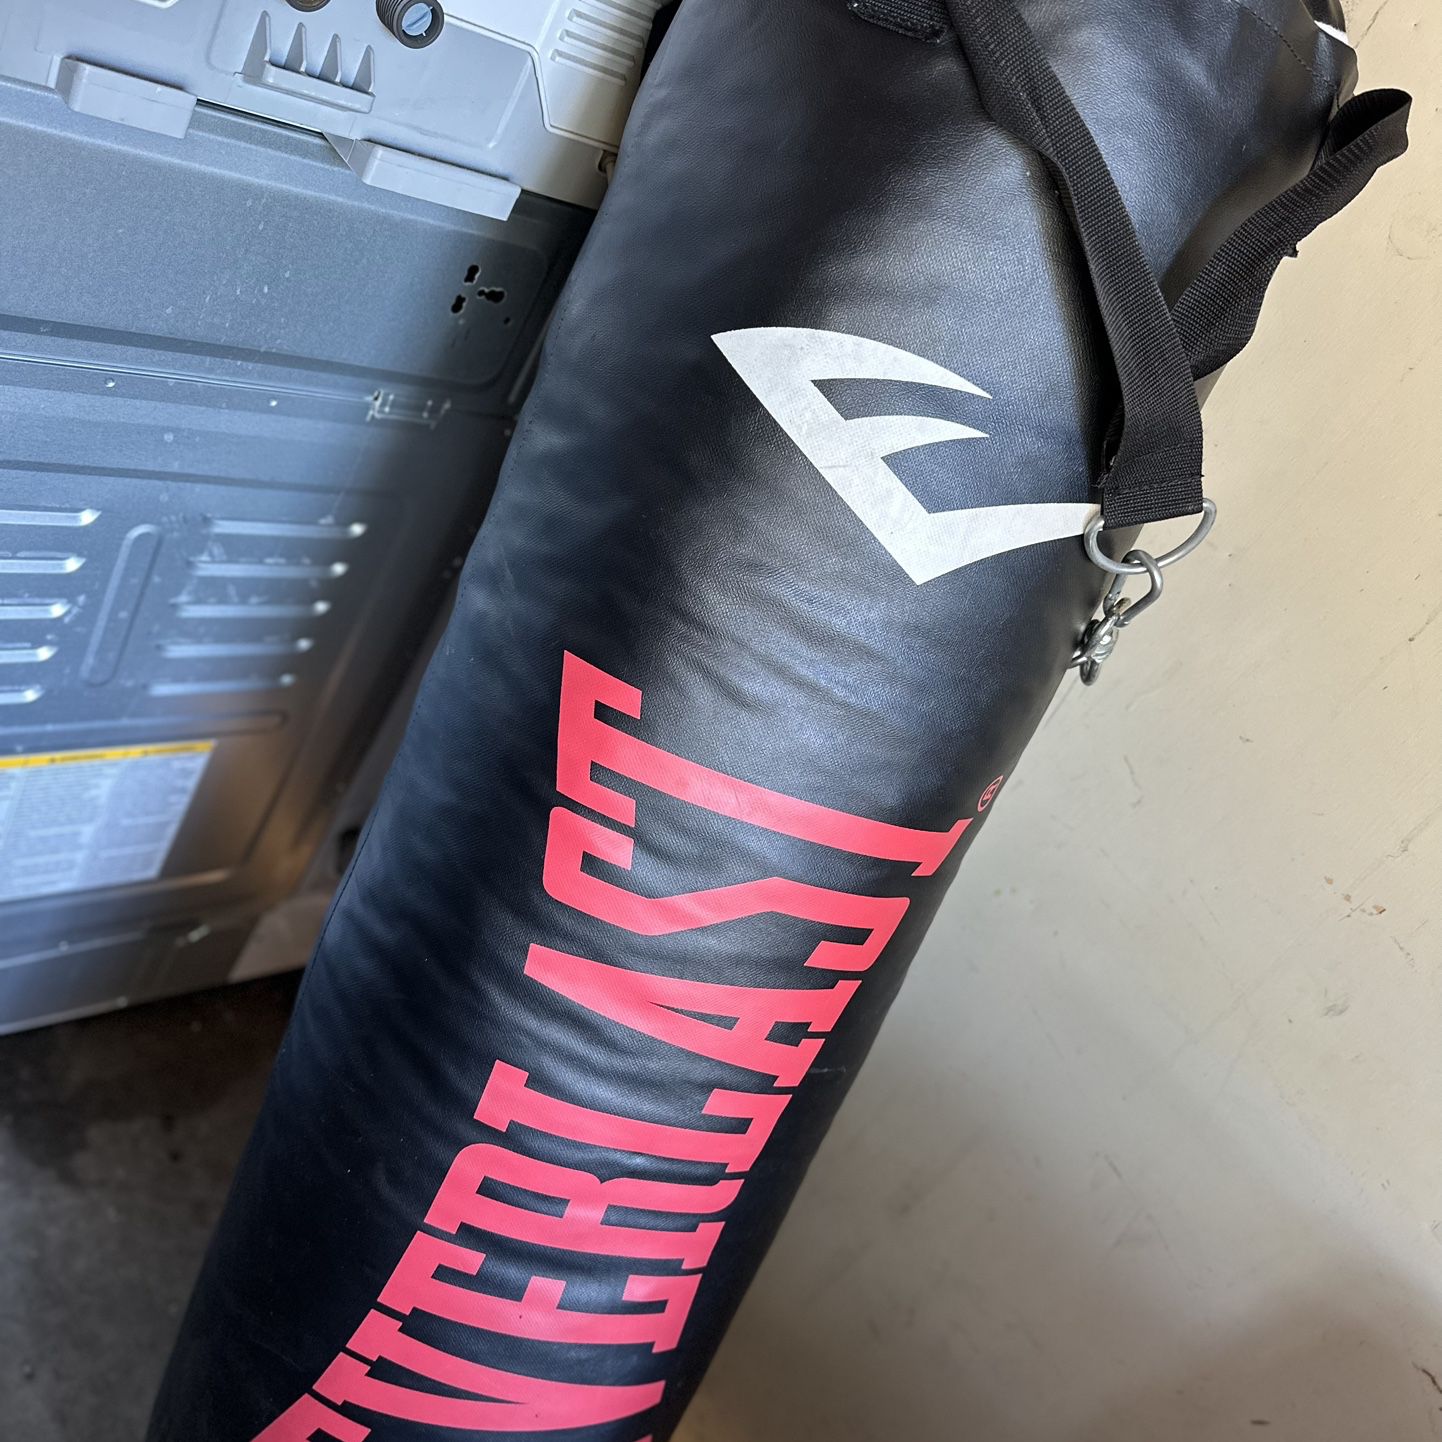 How To Install A Heavy Bag- A STEP BY STEP GUIDE FOR YOUR HOME GYM